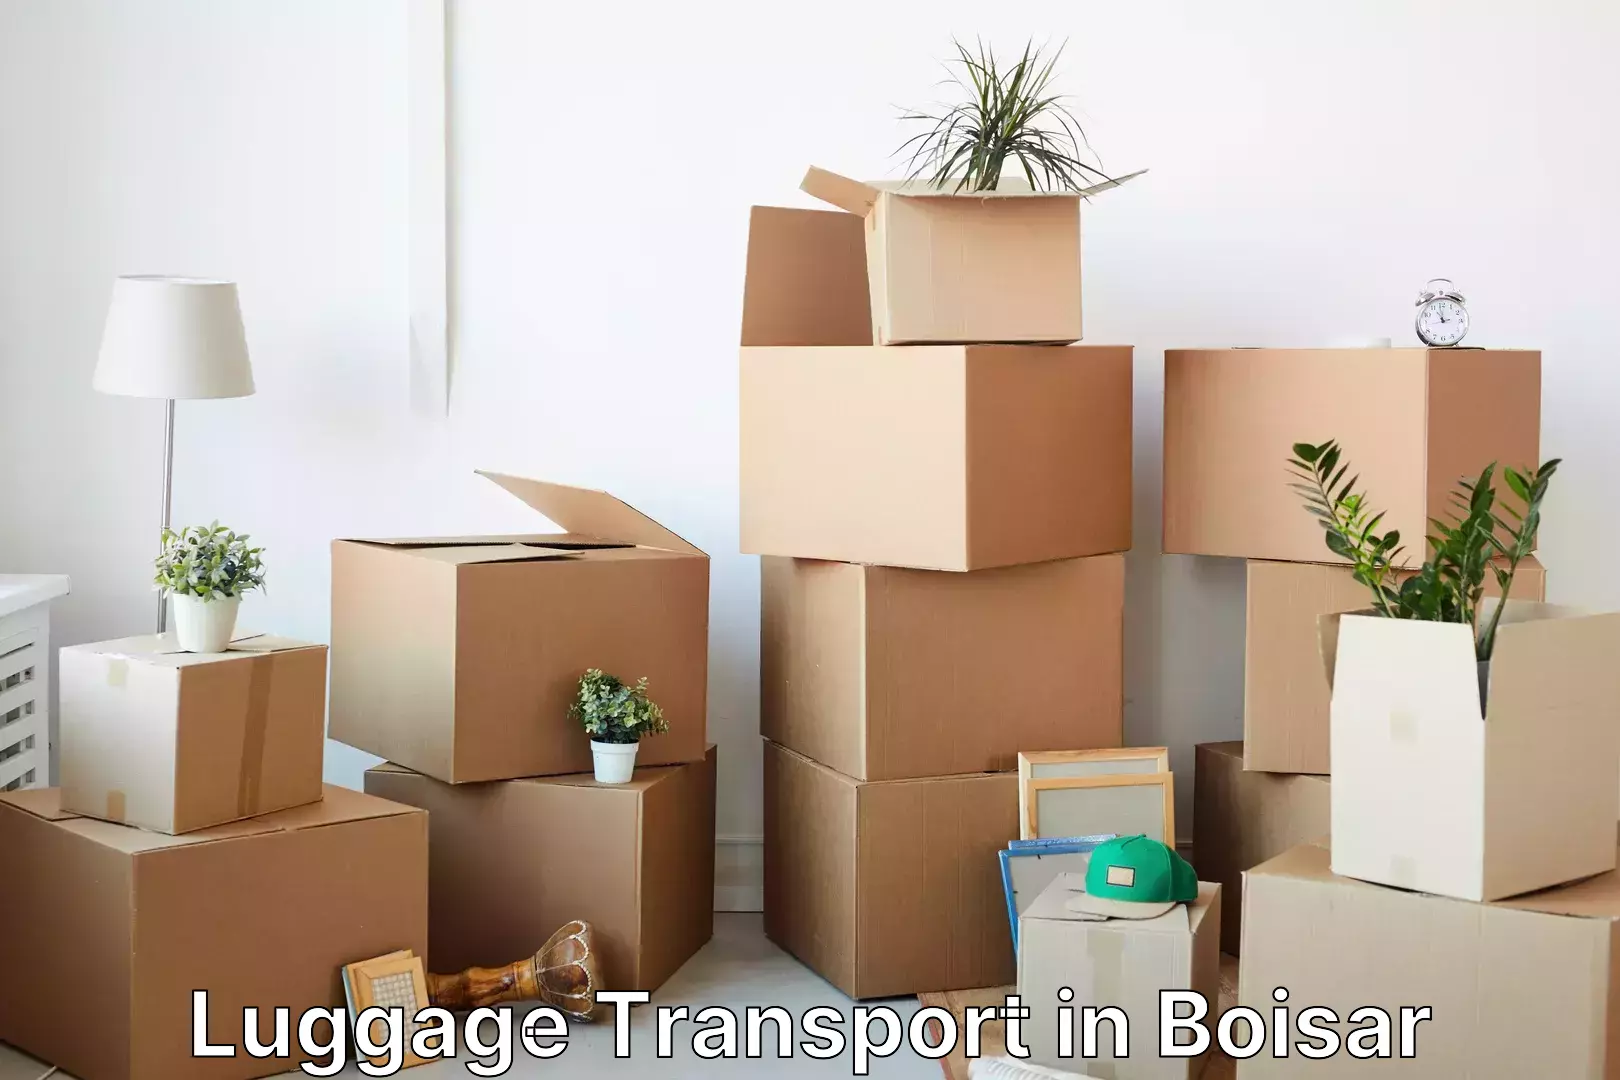 Baggage transport quote in Boisar